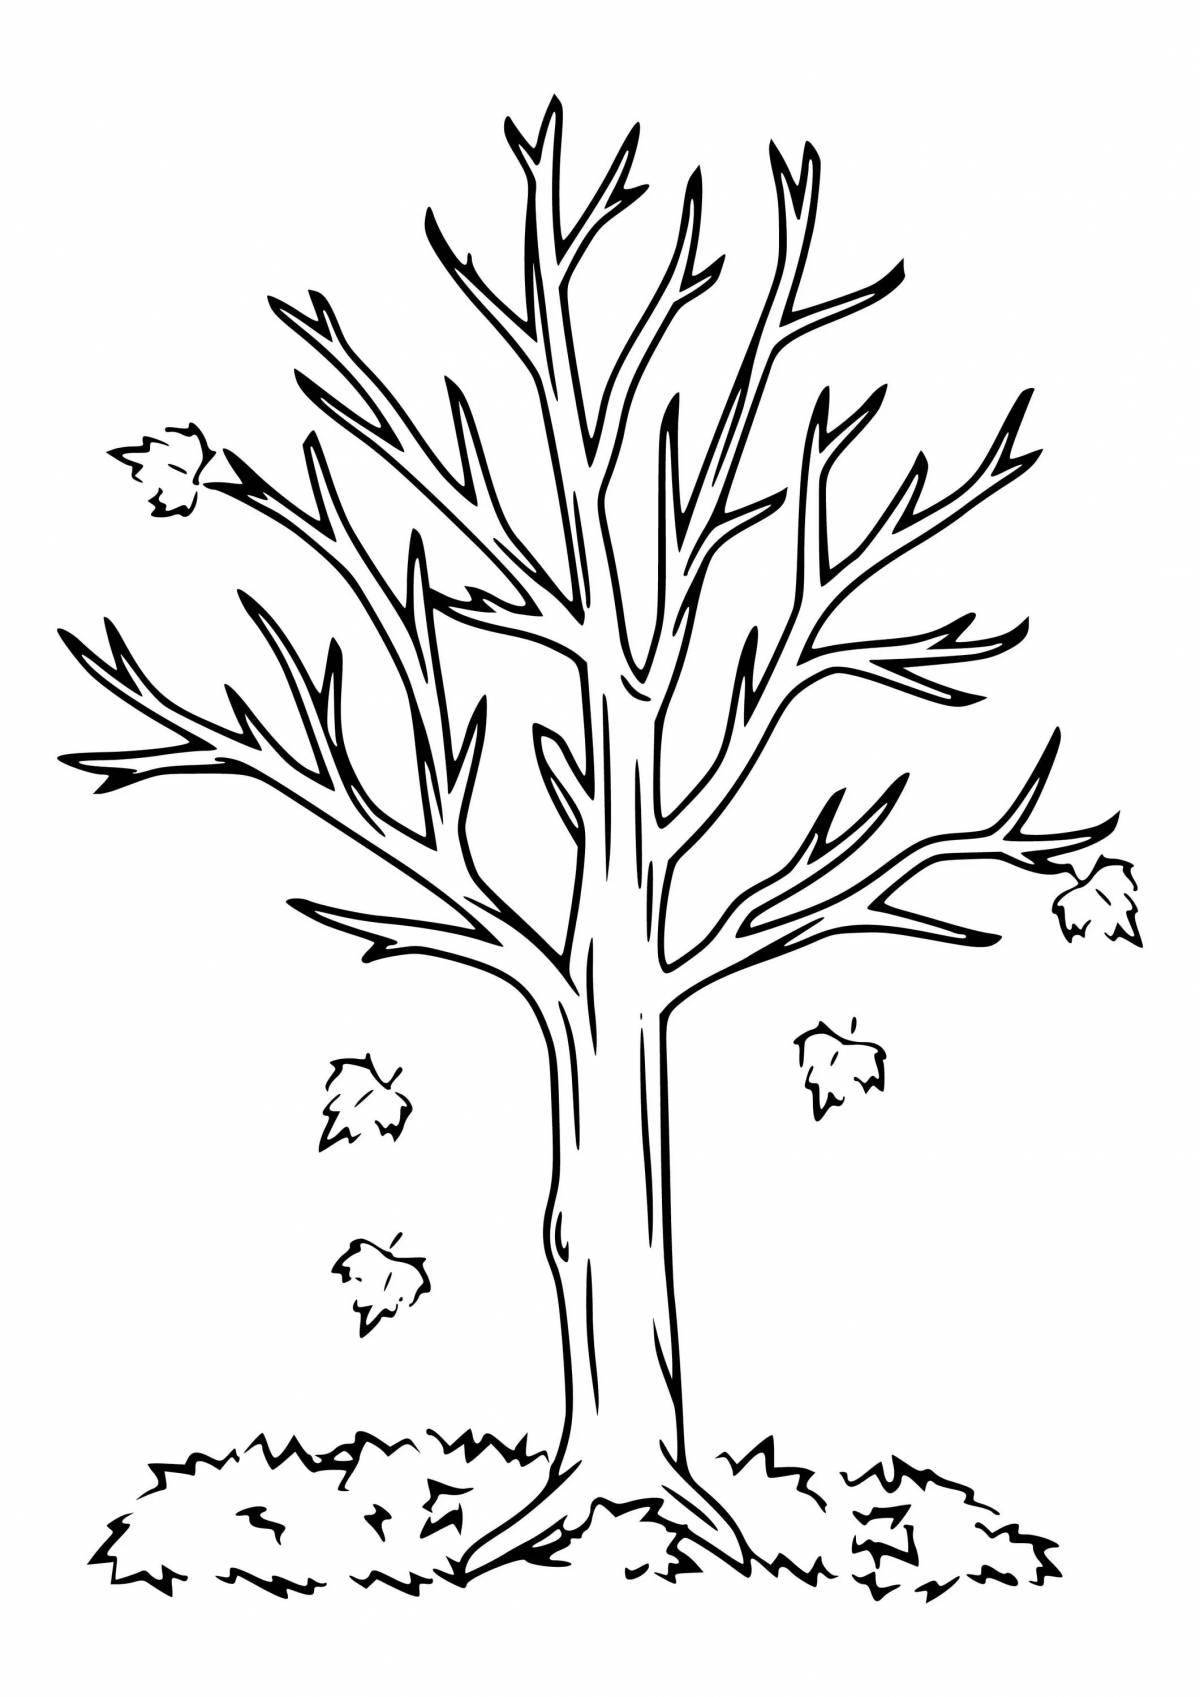 Sky winter tree coloring page